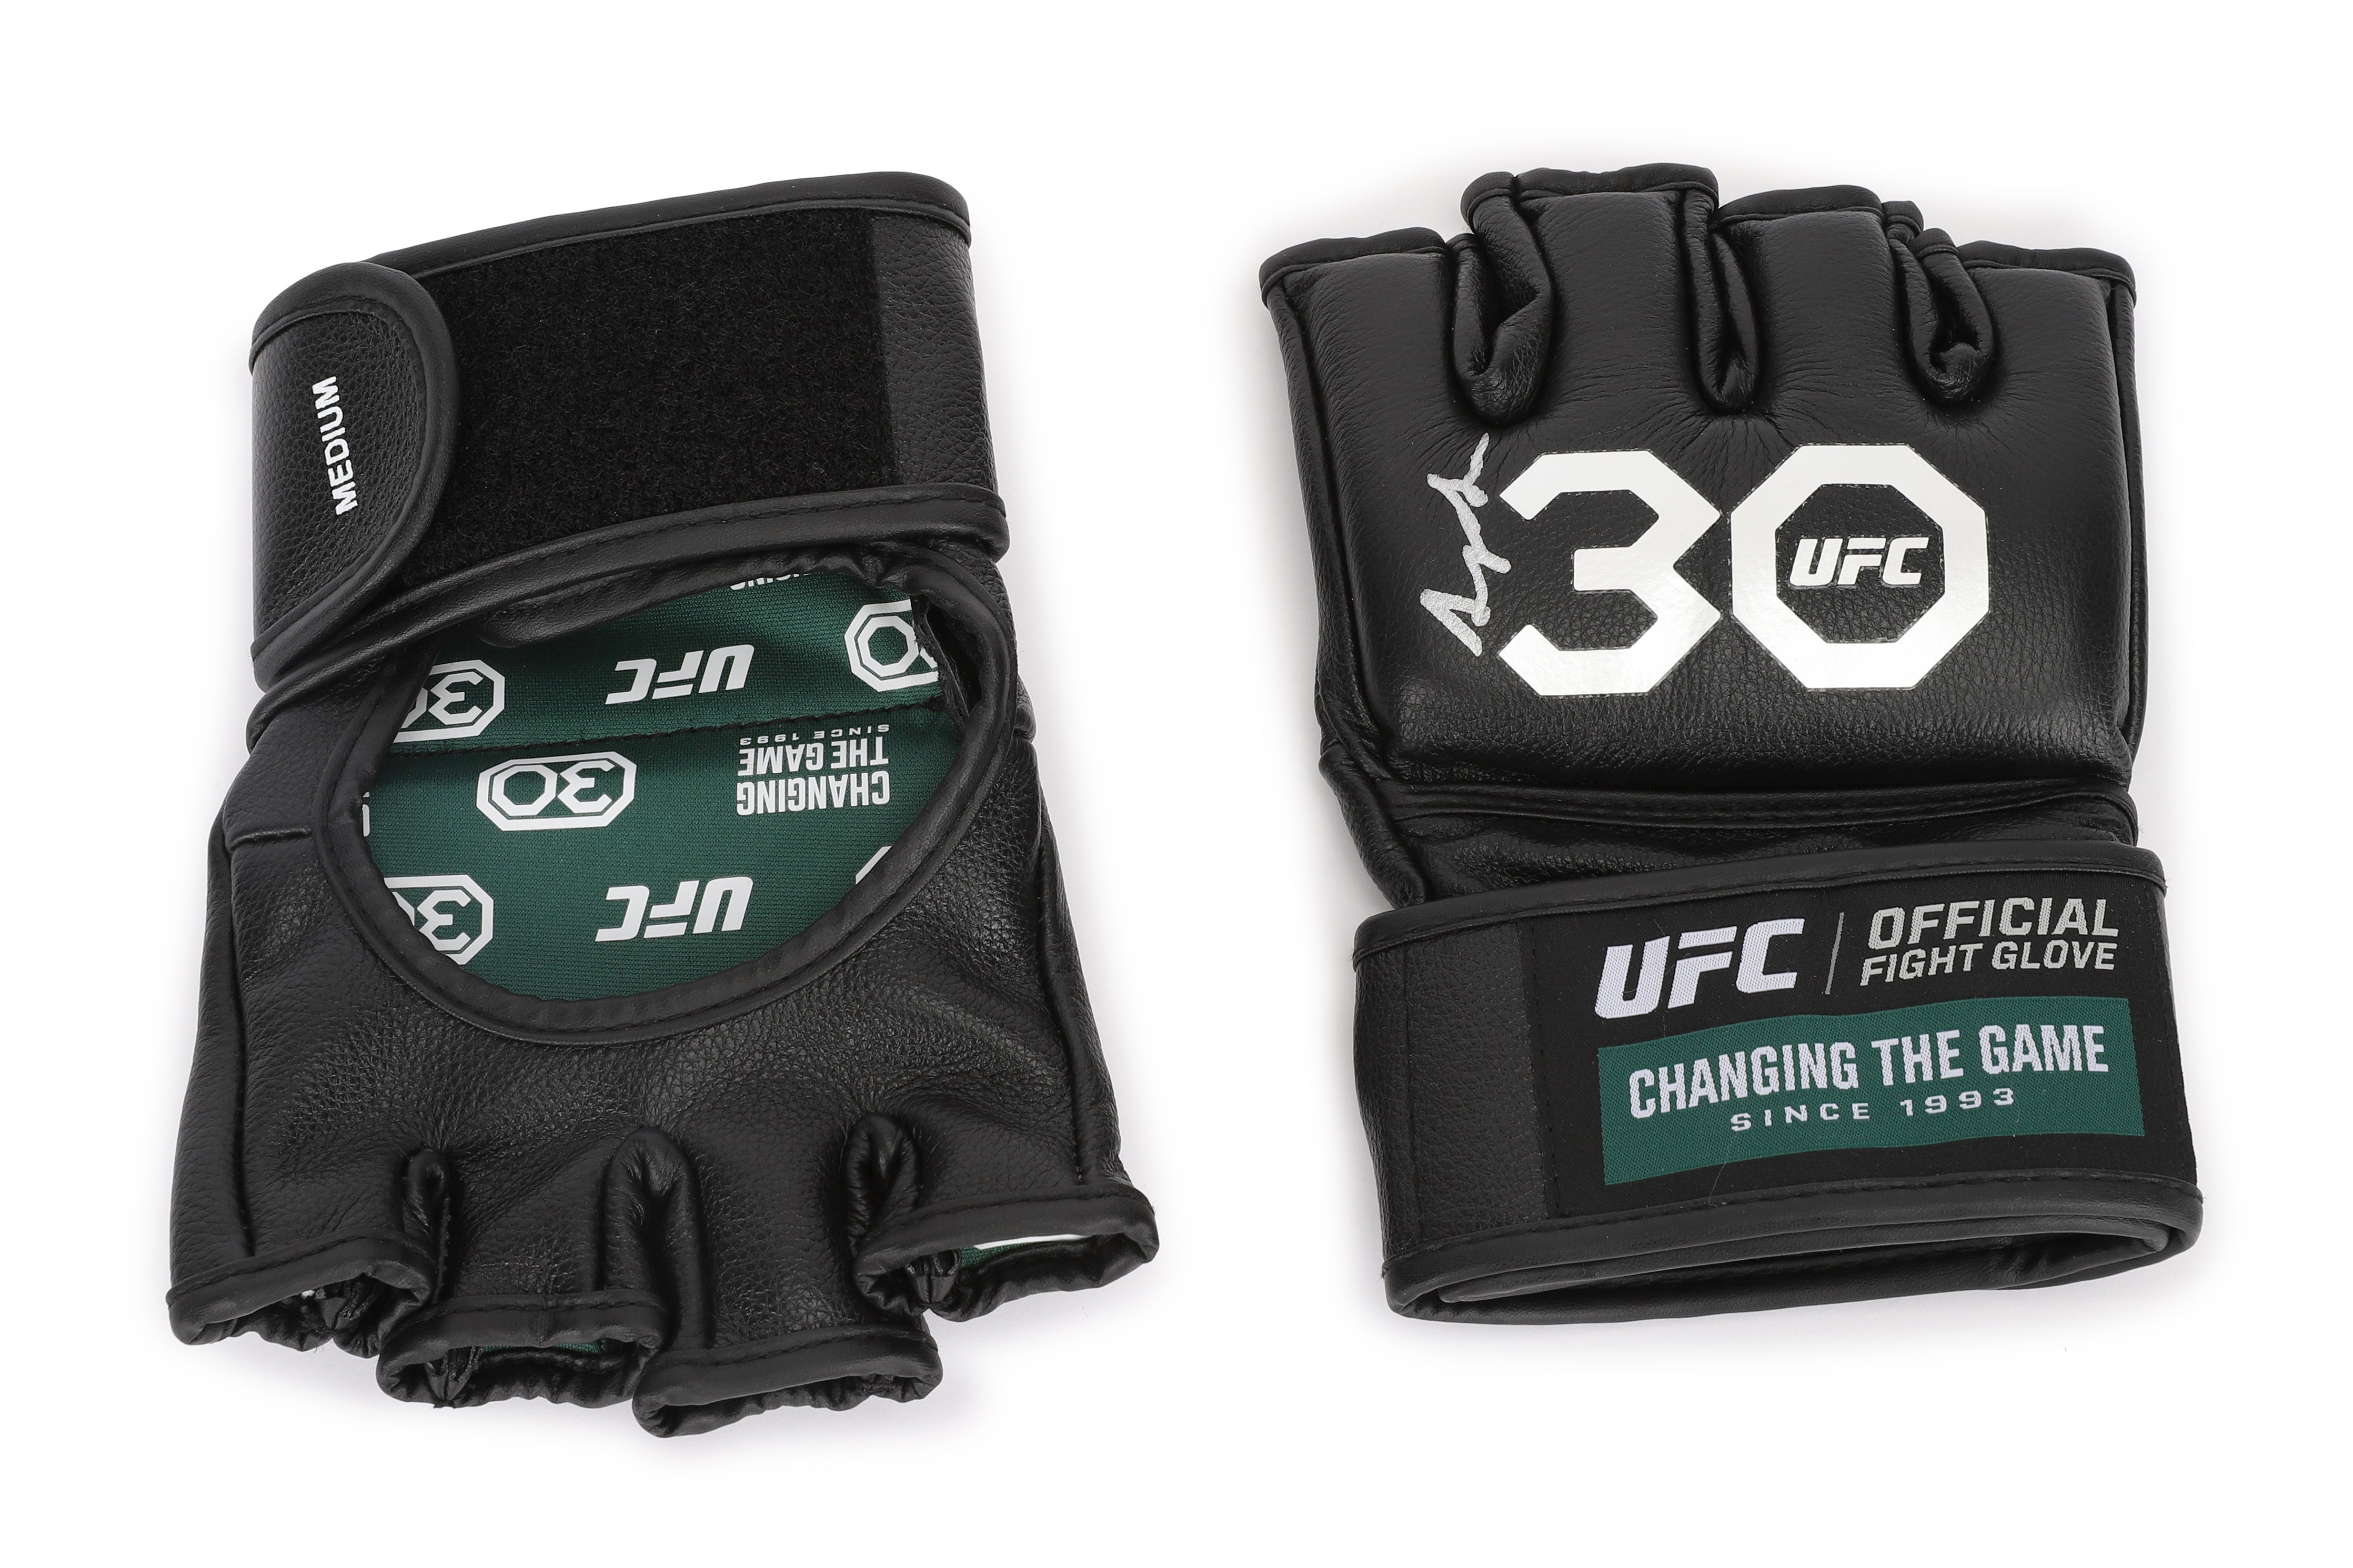 Sean O'Malley Signed Official UFC Gloves – 30th Anniversary Edition